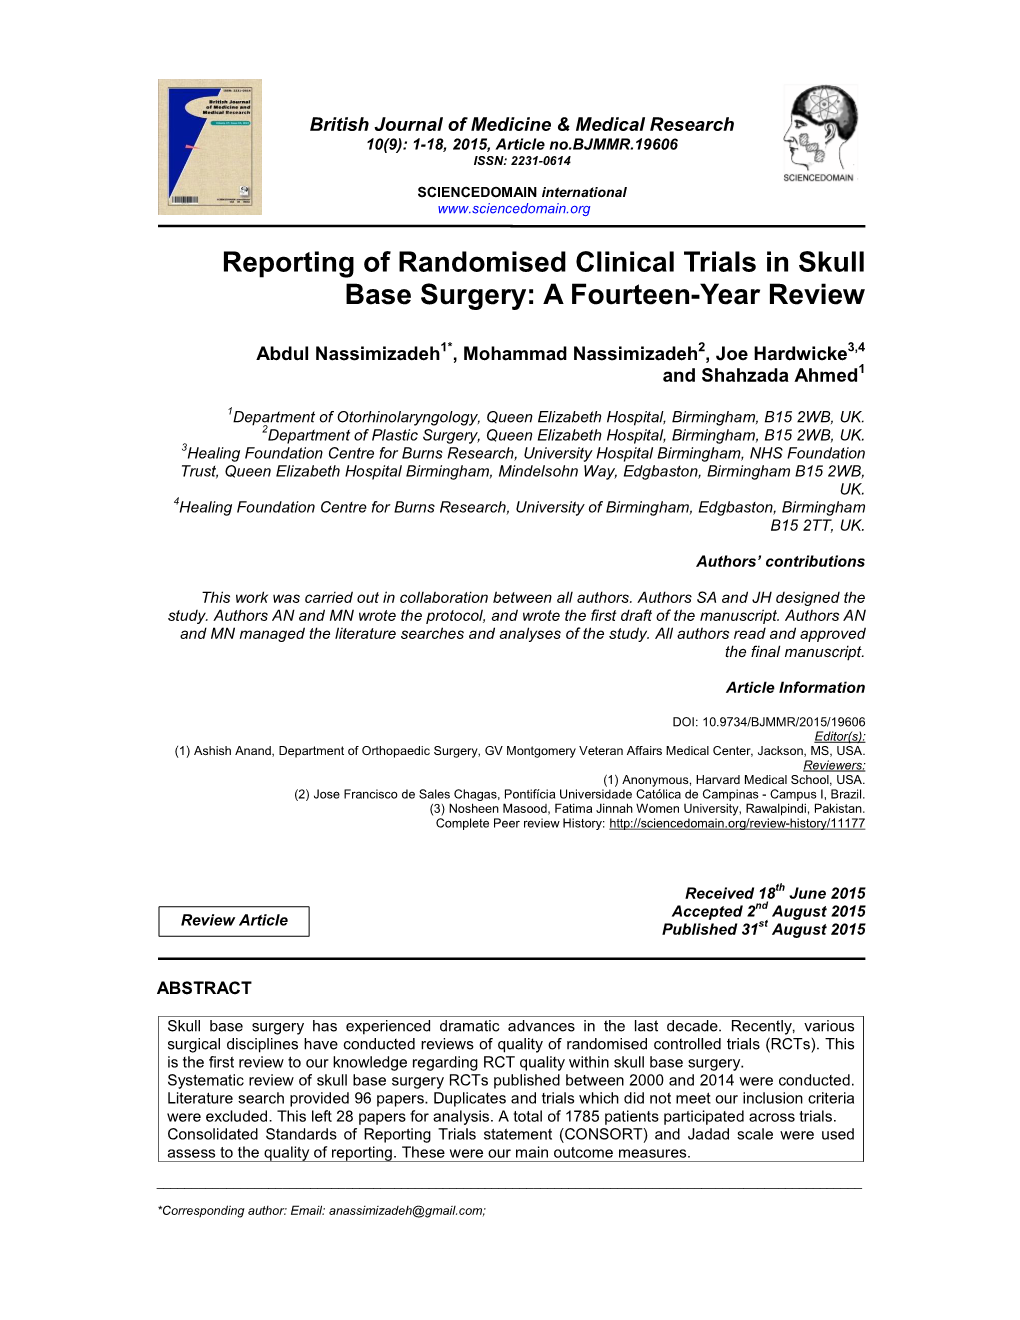 Reporting of Randomised Clinical Trials in Skull Base Surgery: a Fourteen-Year Review